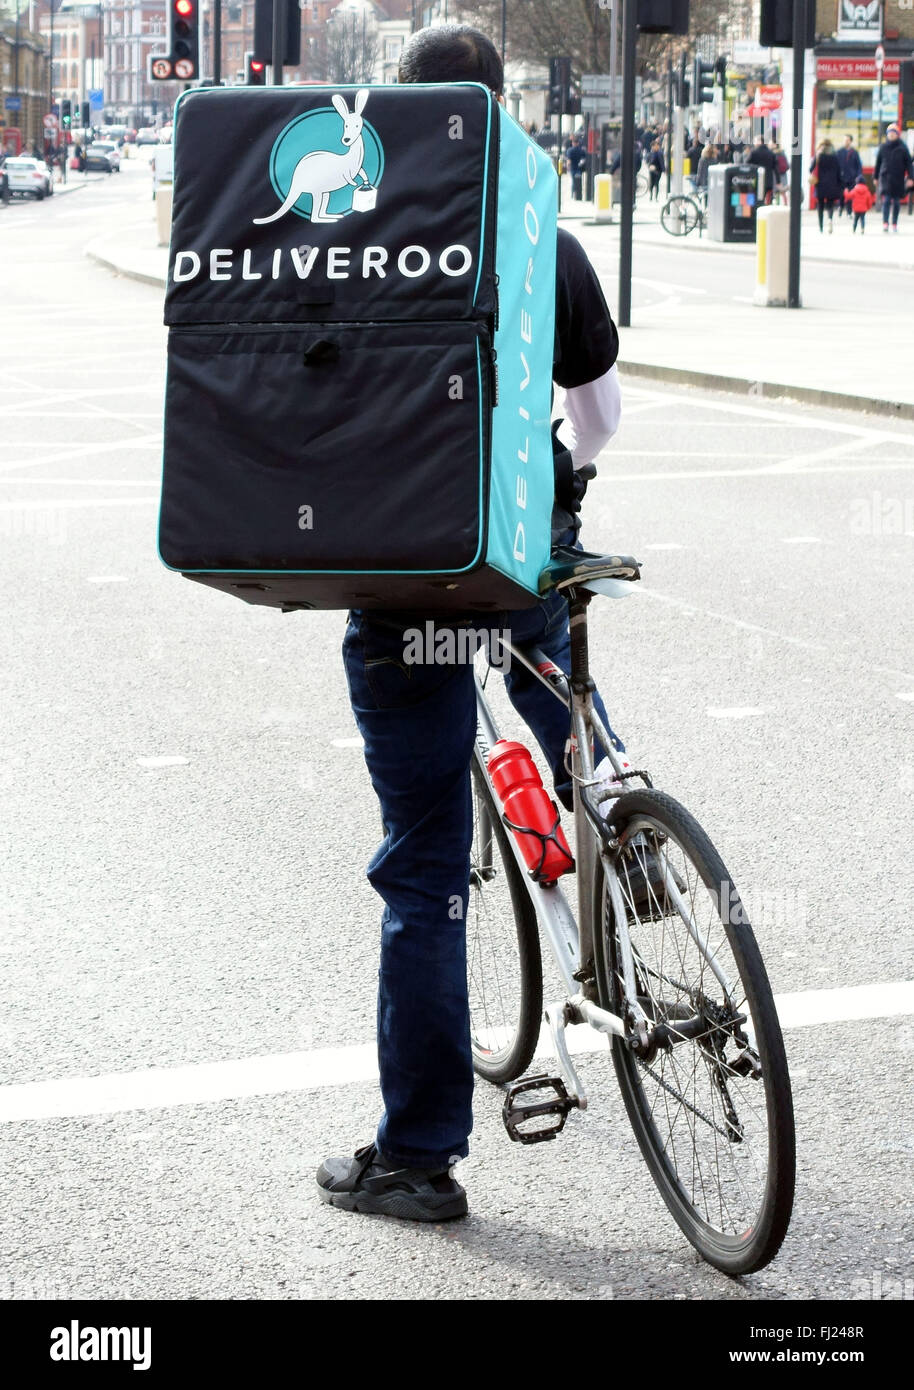 Deliveroo home food delivery service bicycle courier, London Stock Photo